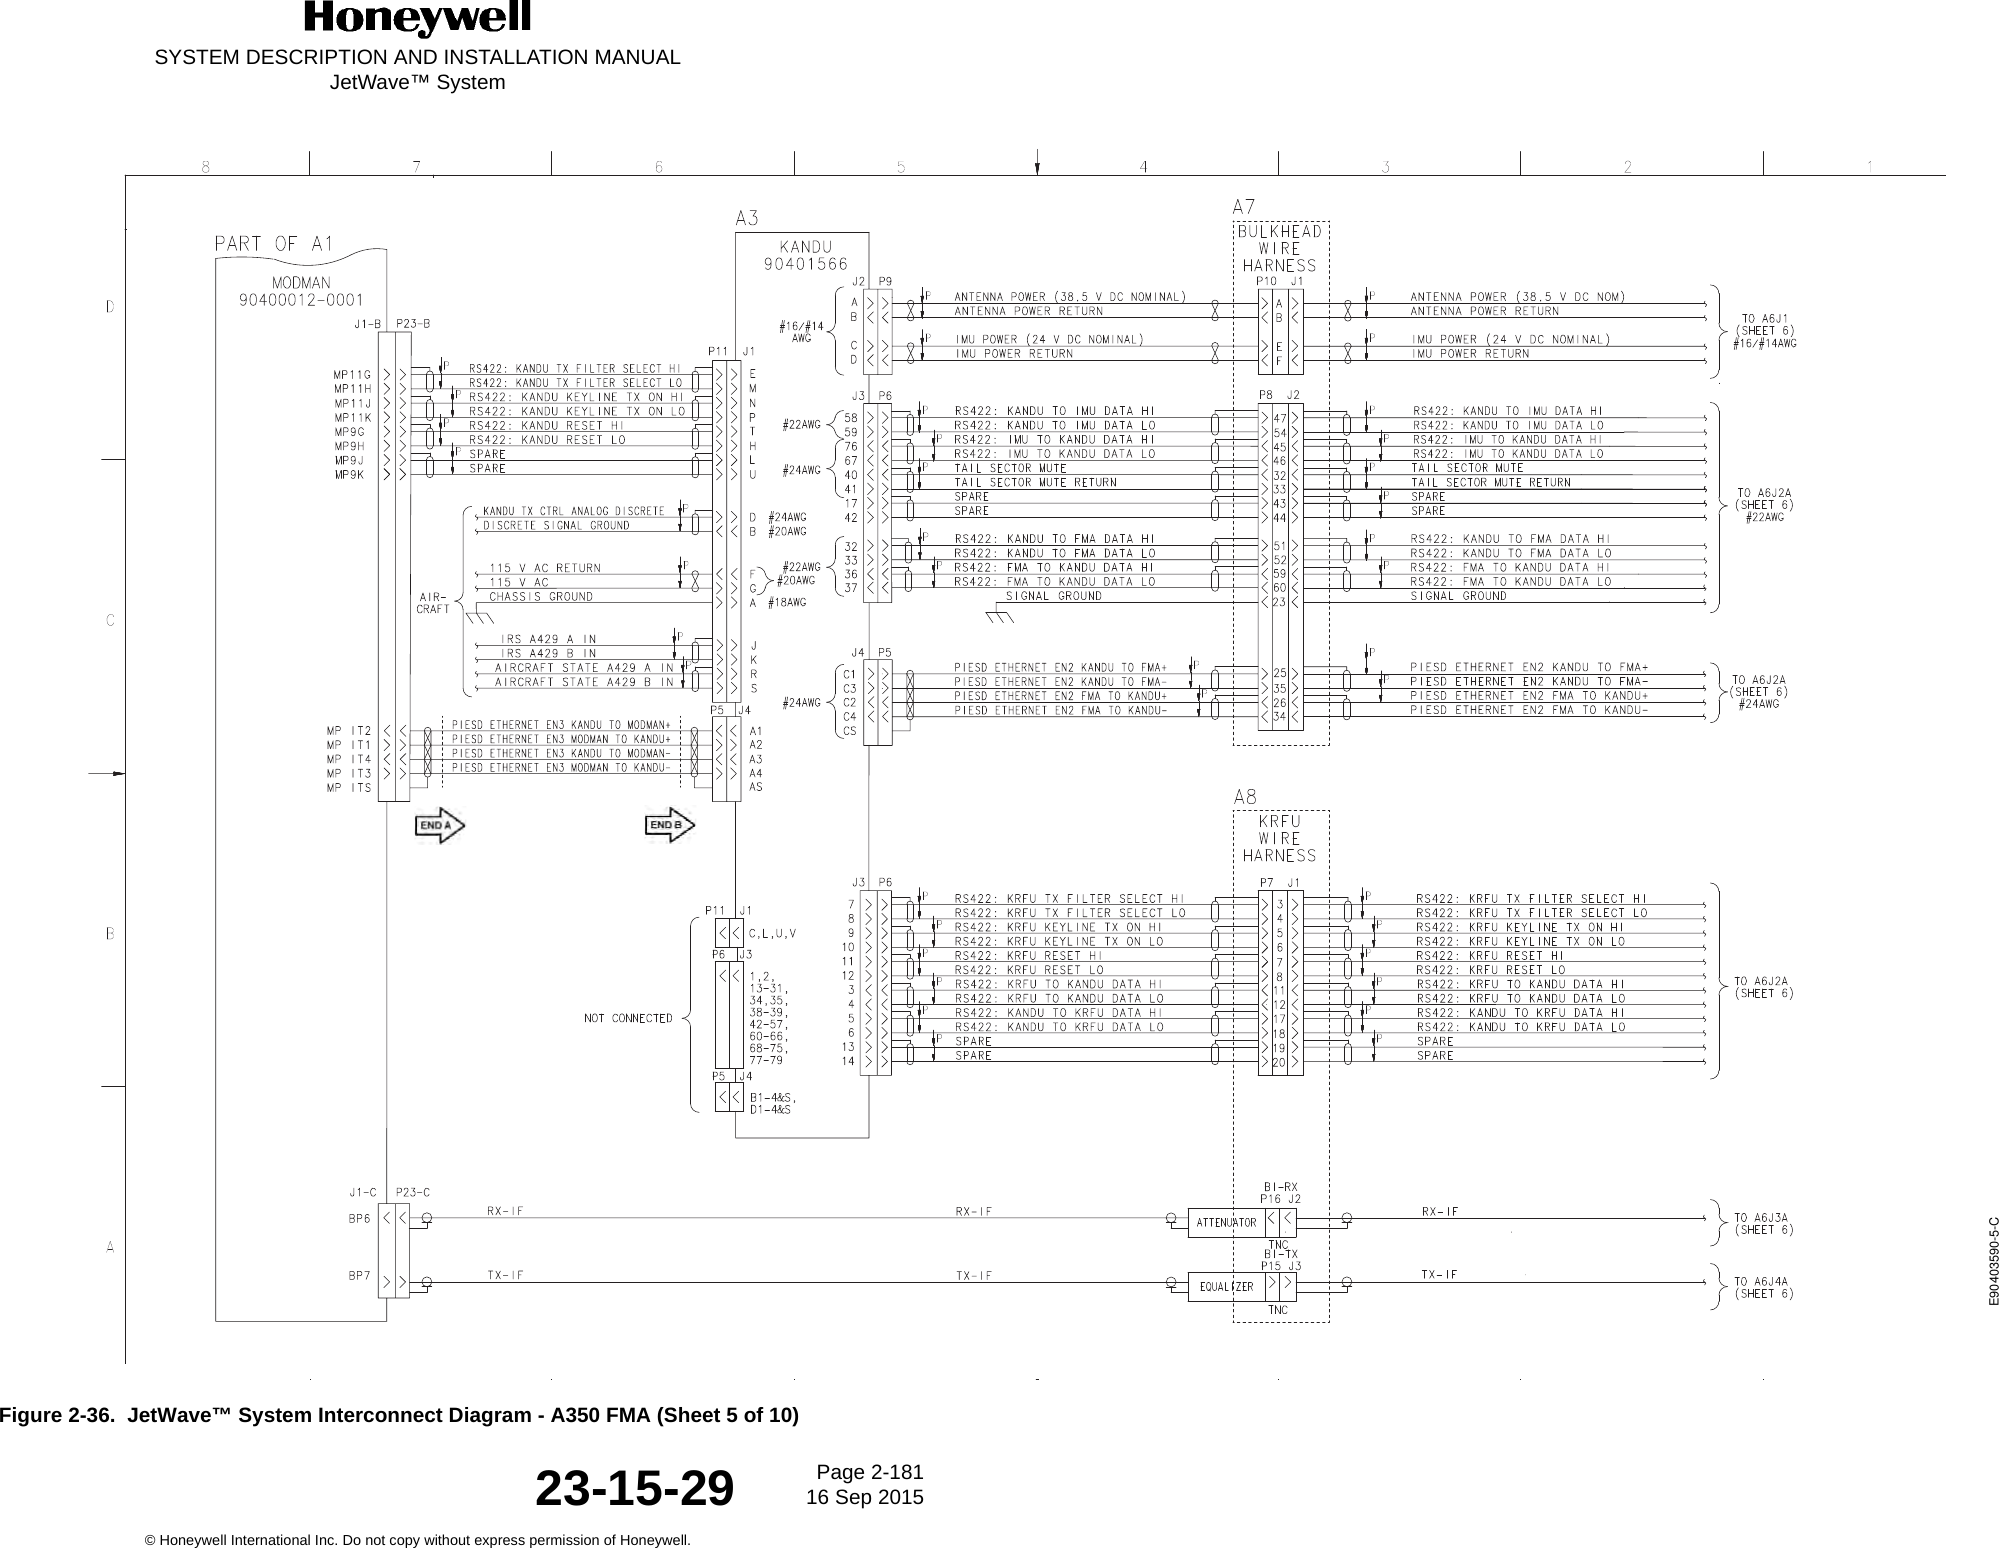 SYSTEM DESCRIPTION AND INSTALLATION MANUALJetWave™ SystemPage 2-181 16 Sep 2015© Honeywell International Inc. Do not copy without express permission of Honeywell.23-15-29Figure 2-36.  JetWave™ System Interconnect Diagram - A350 FMA (Sheet 5 of 10)E90403590-5-C